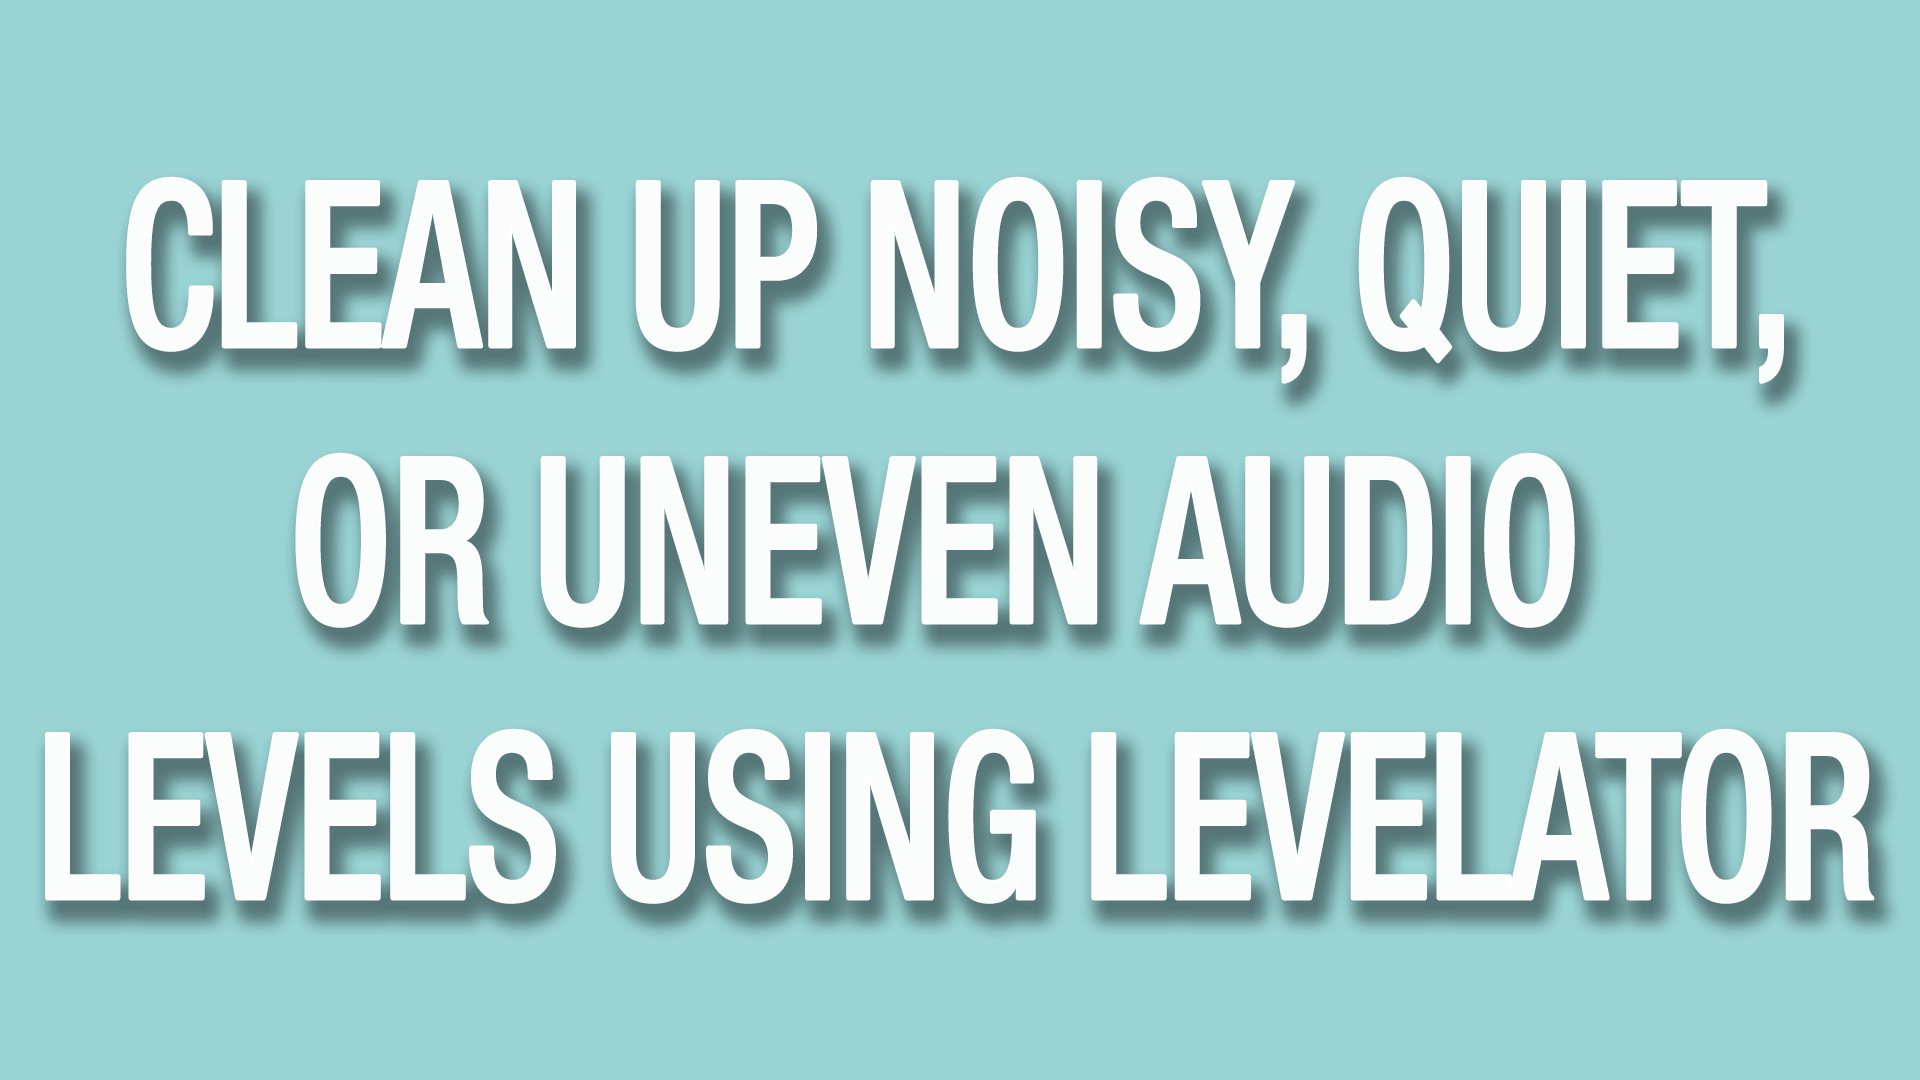 Clean up noisy, quiet, or uneven audio levels using The Levelator